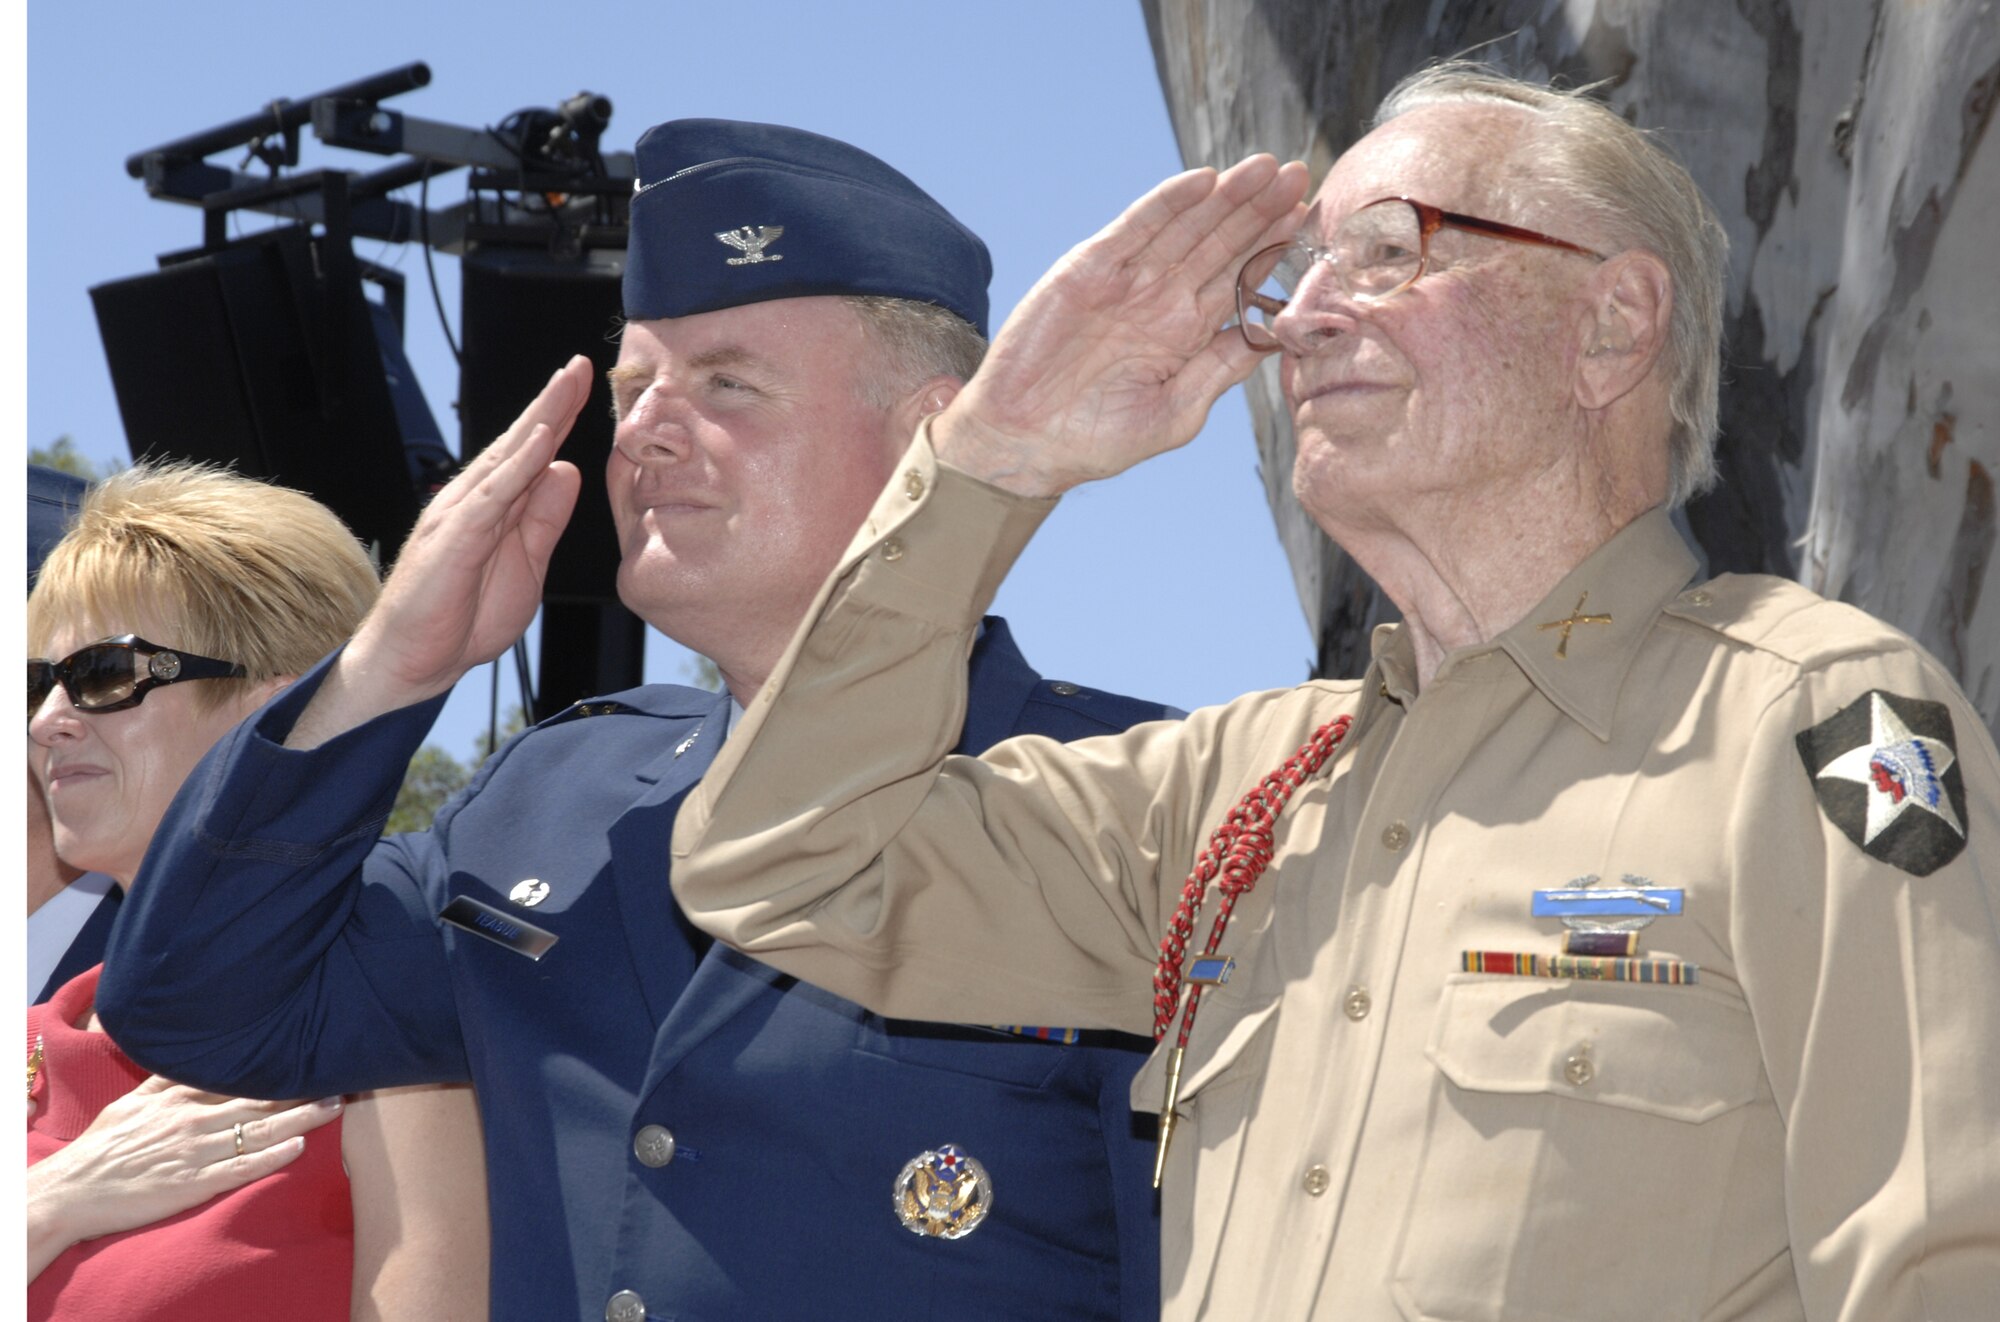 Colonel Roger W. Teague, SBIRS Wing commander, and an unidentified retiree salute passing parade participants during this year’s Torrance Armed Forces Day parade, May 17.  (Photo by Joe Juarez)